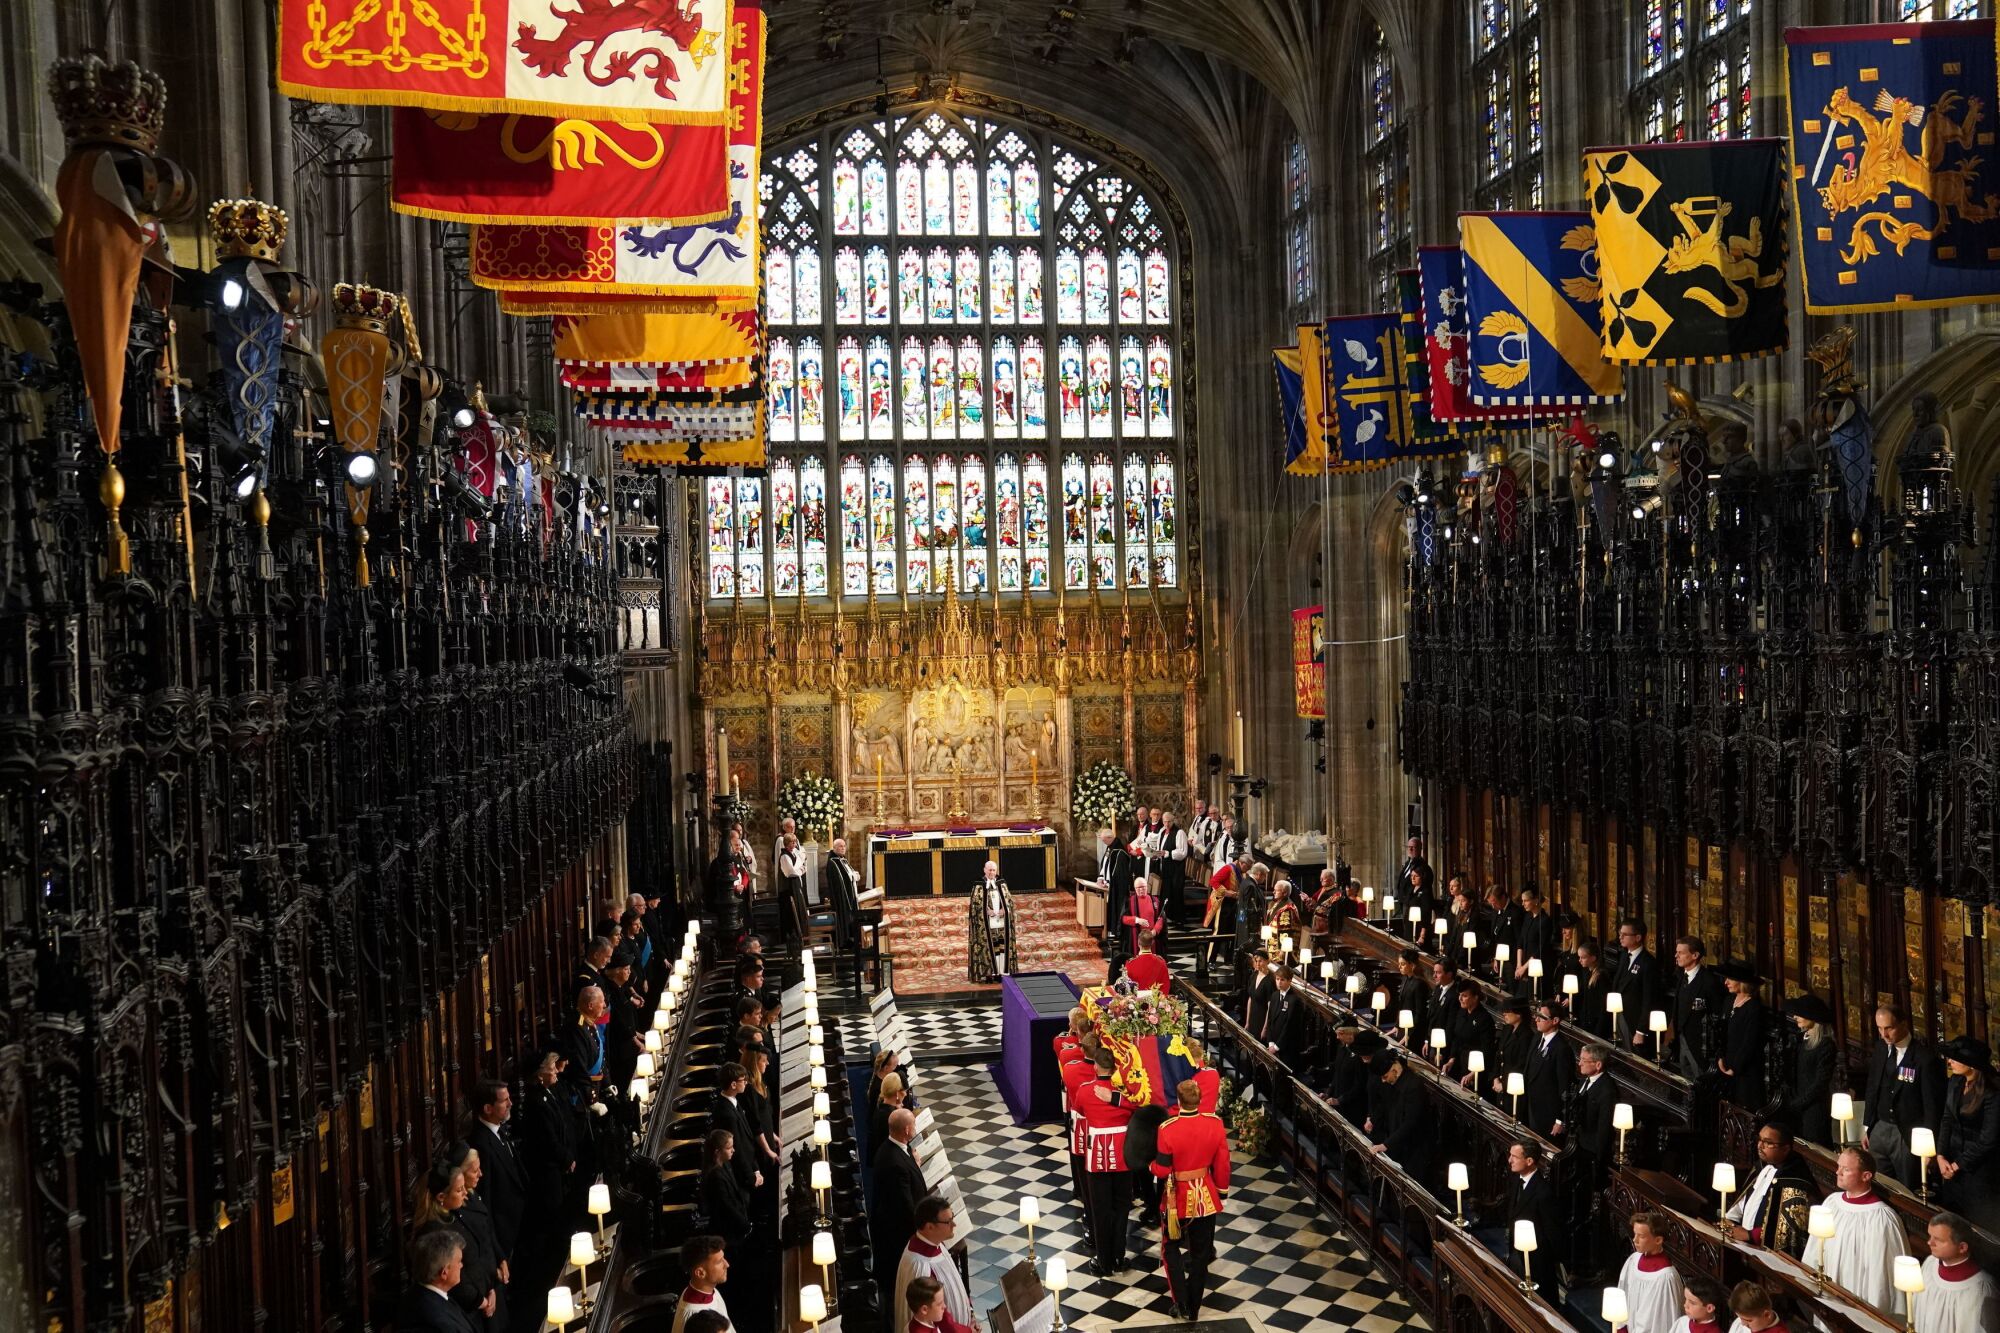 Uniformed pallbearers carry a coffin into St. George's Chapel as attendees stand on pews on either side of the aisle.